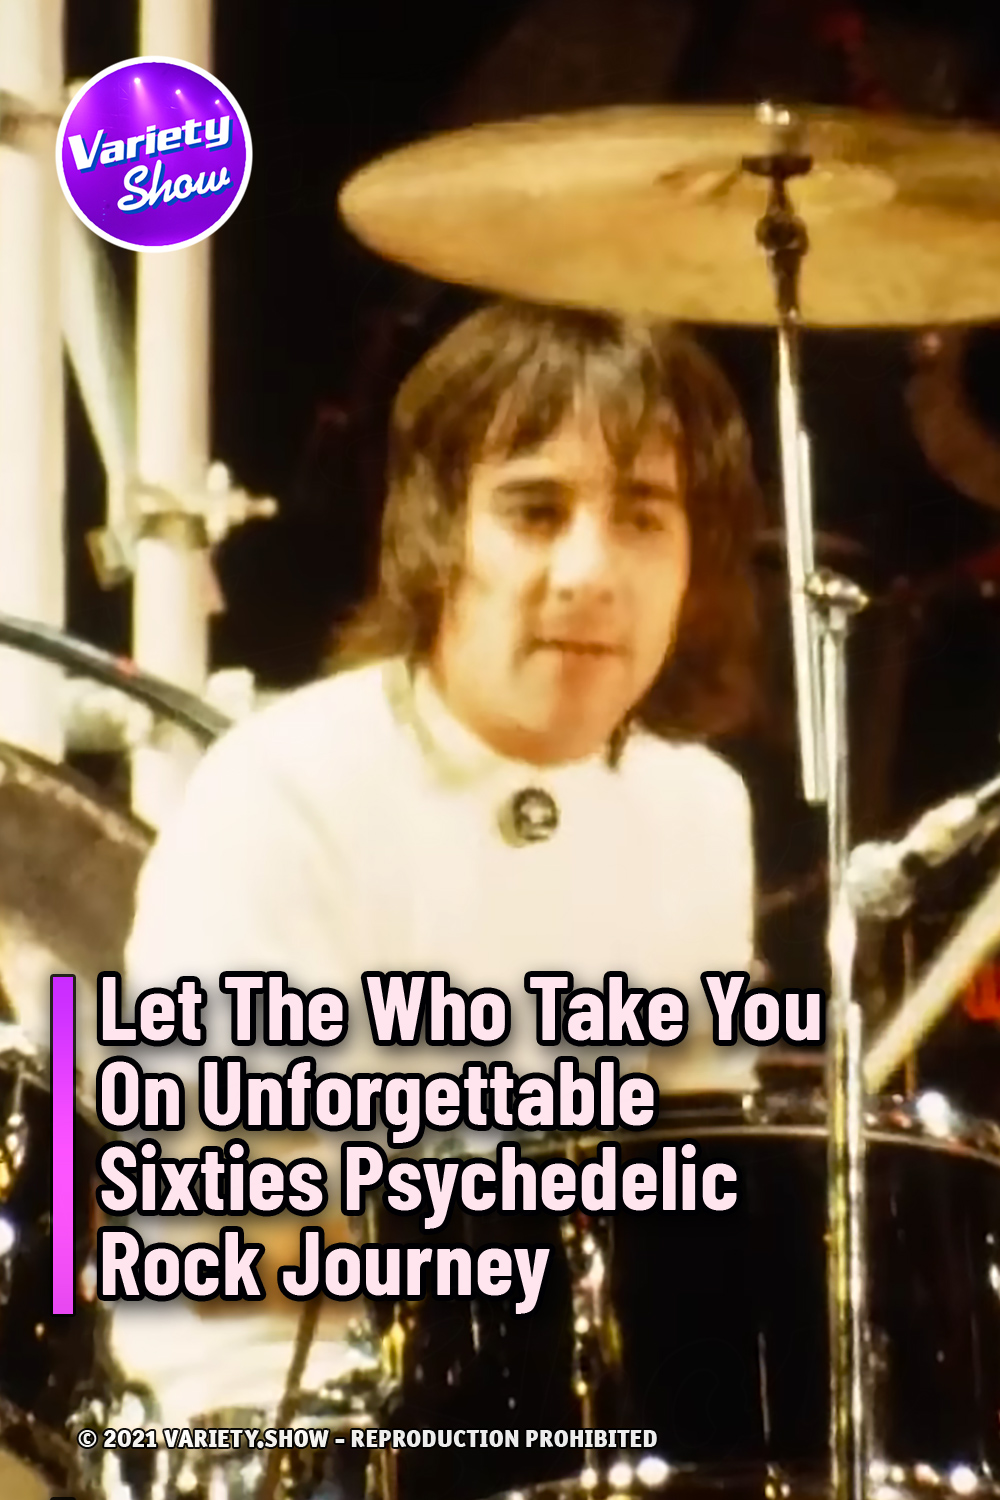 Let The Who Take You On Unforgettable Sixties Psychedelic Rock Journey